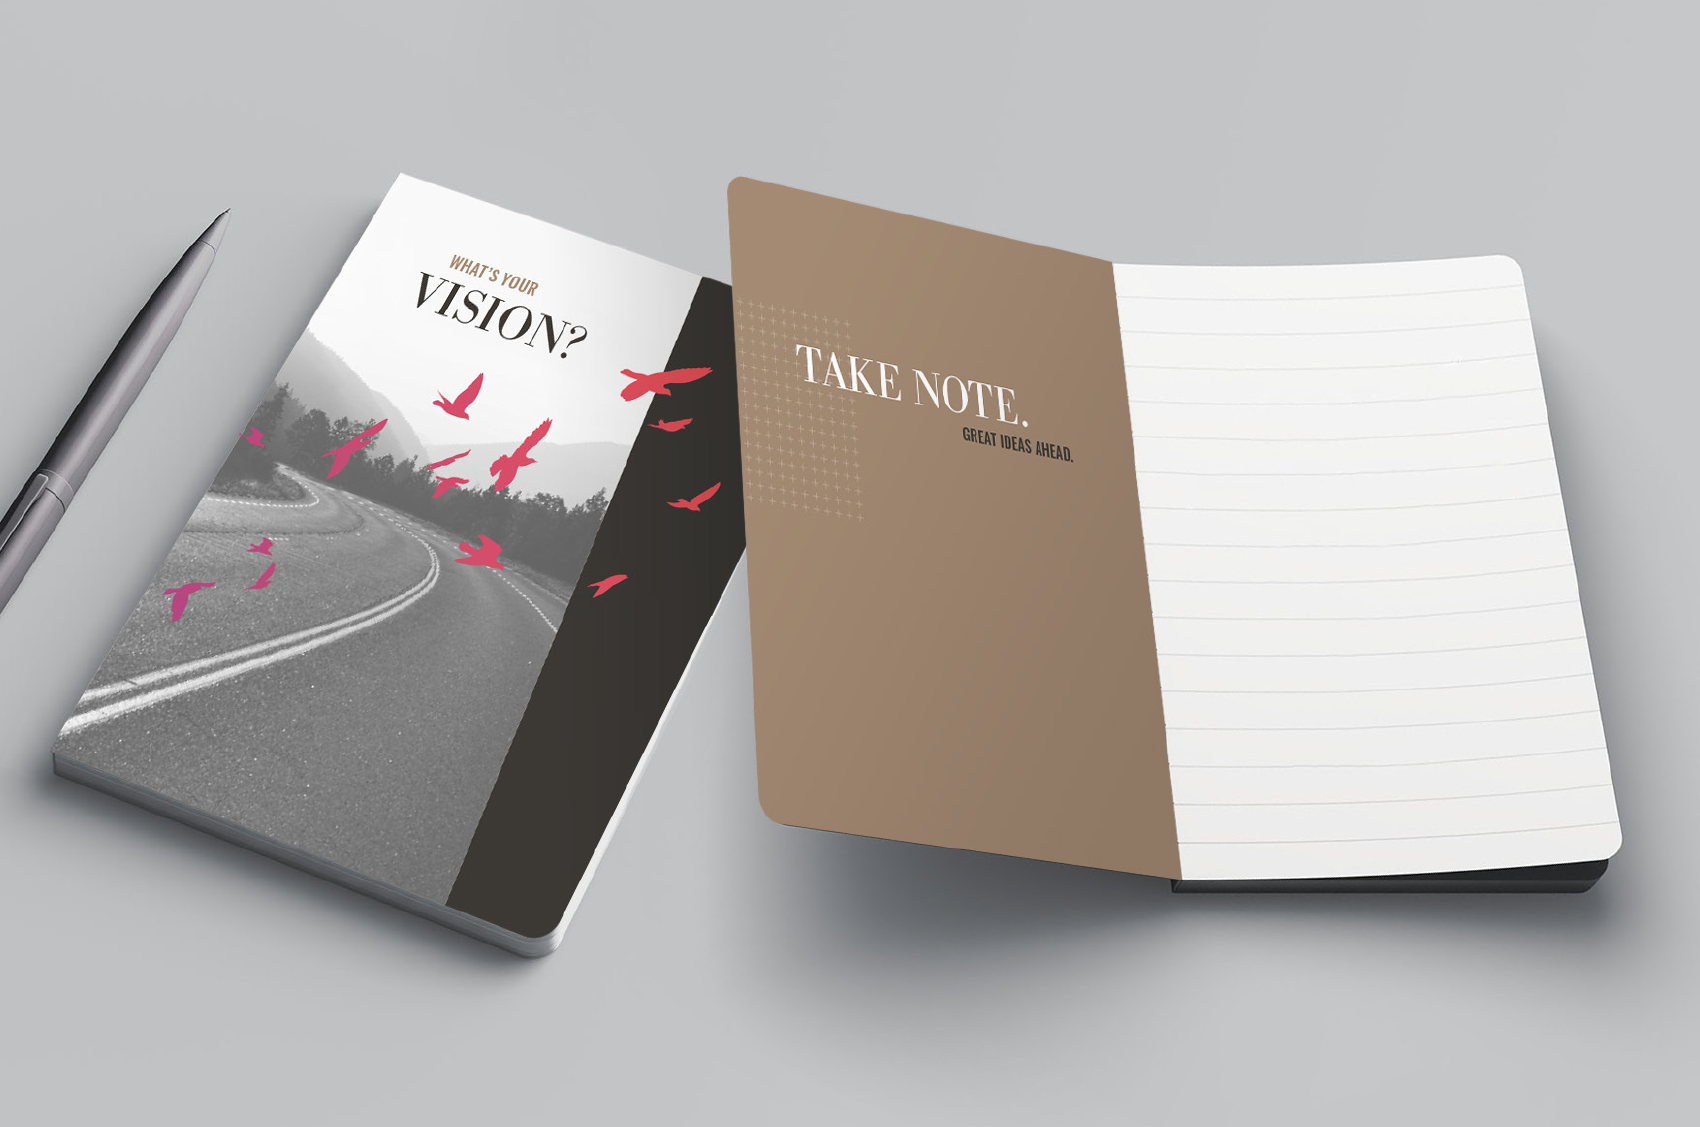 Notebook designed for Fortress Bank's "What's Your Vision?" campaign.